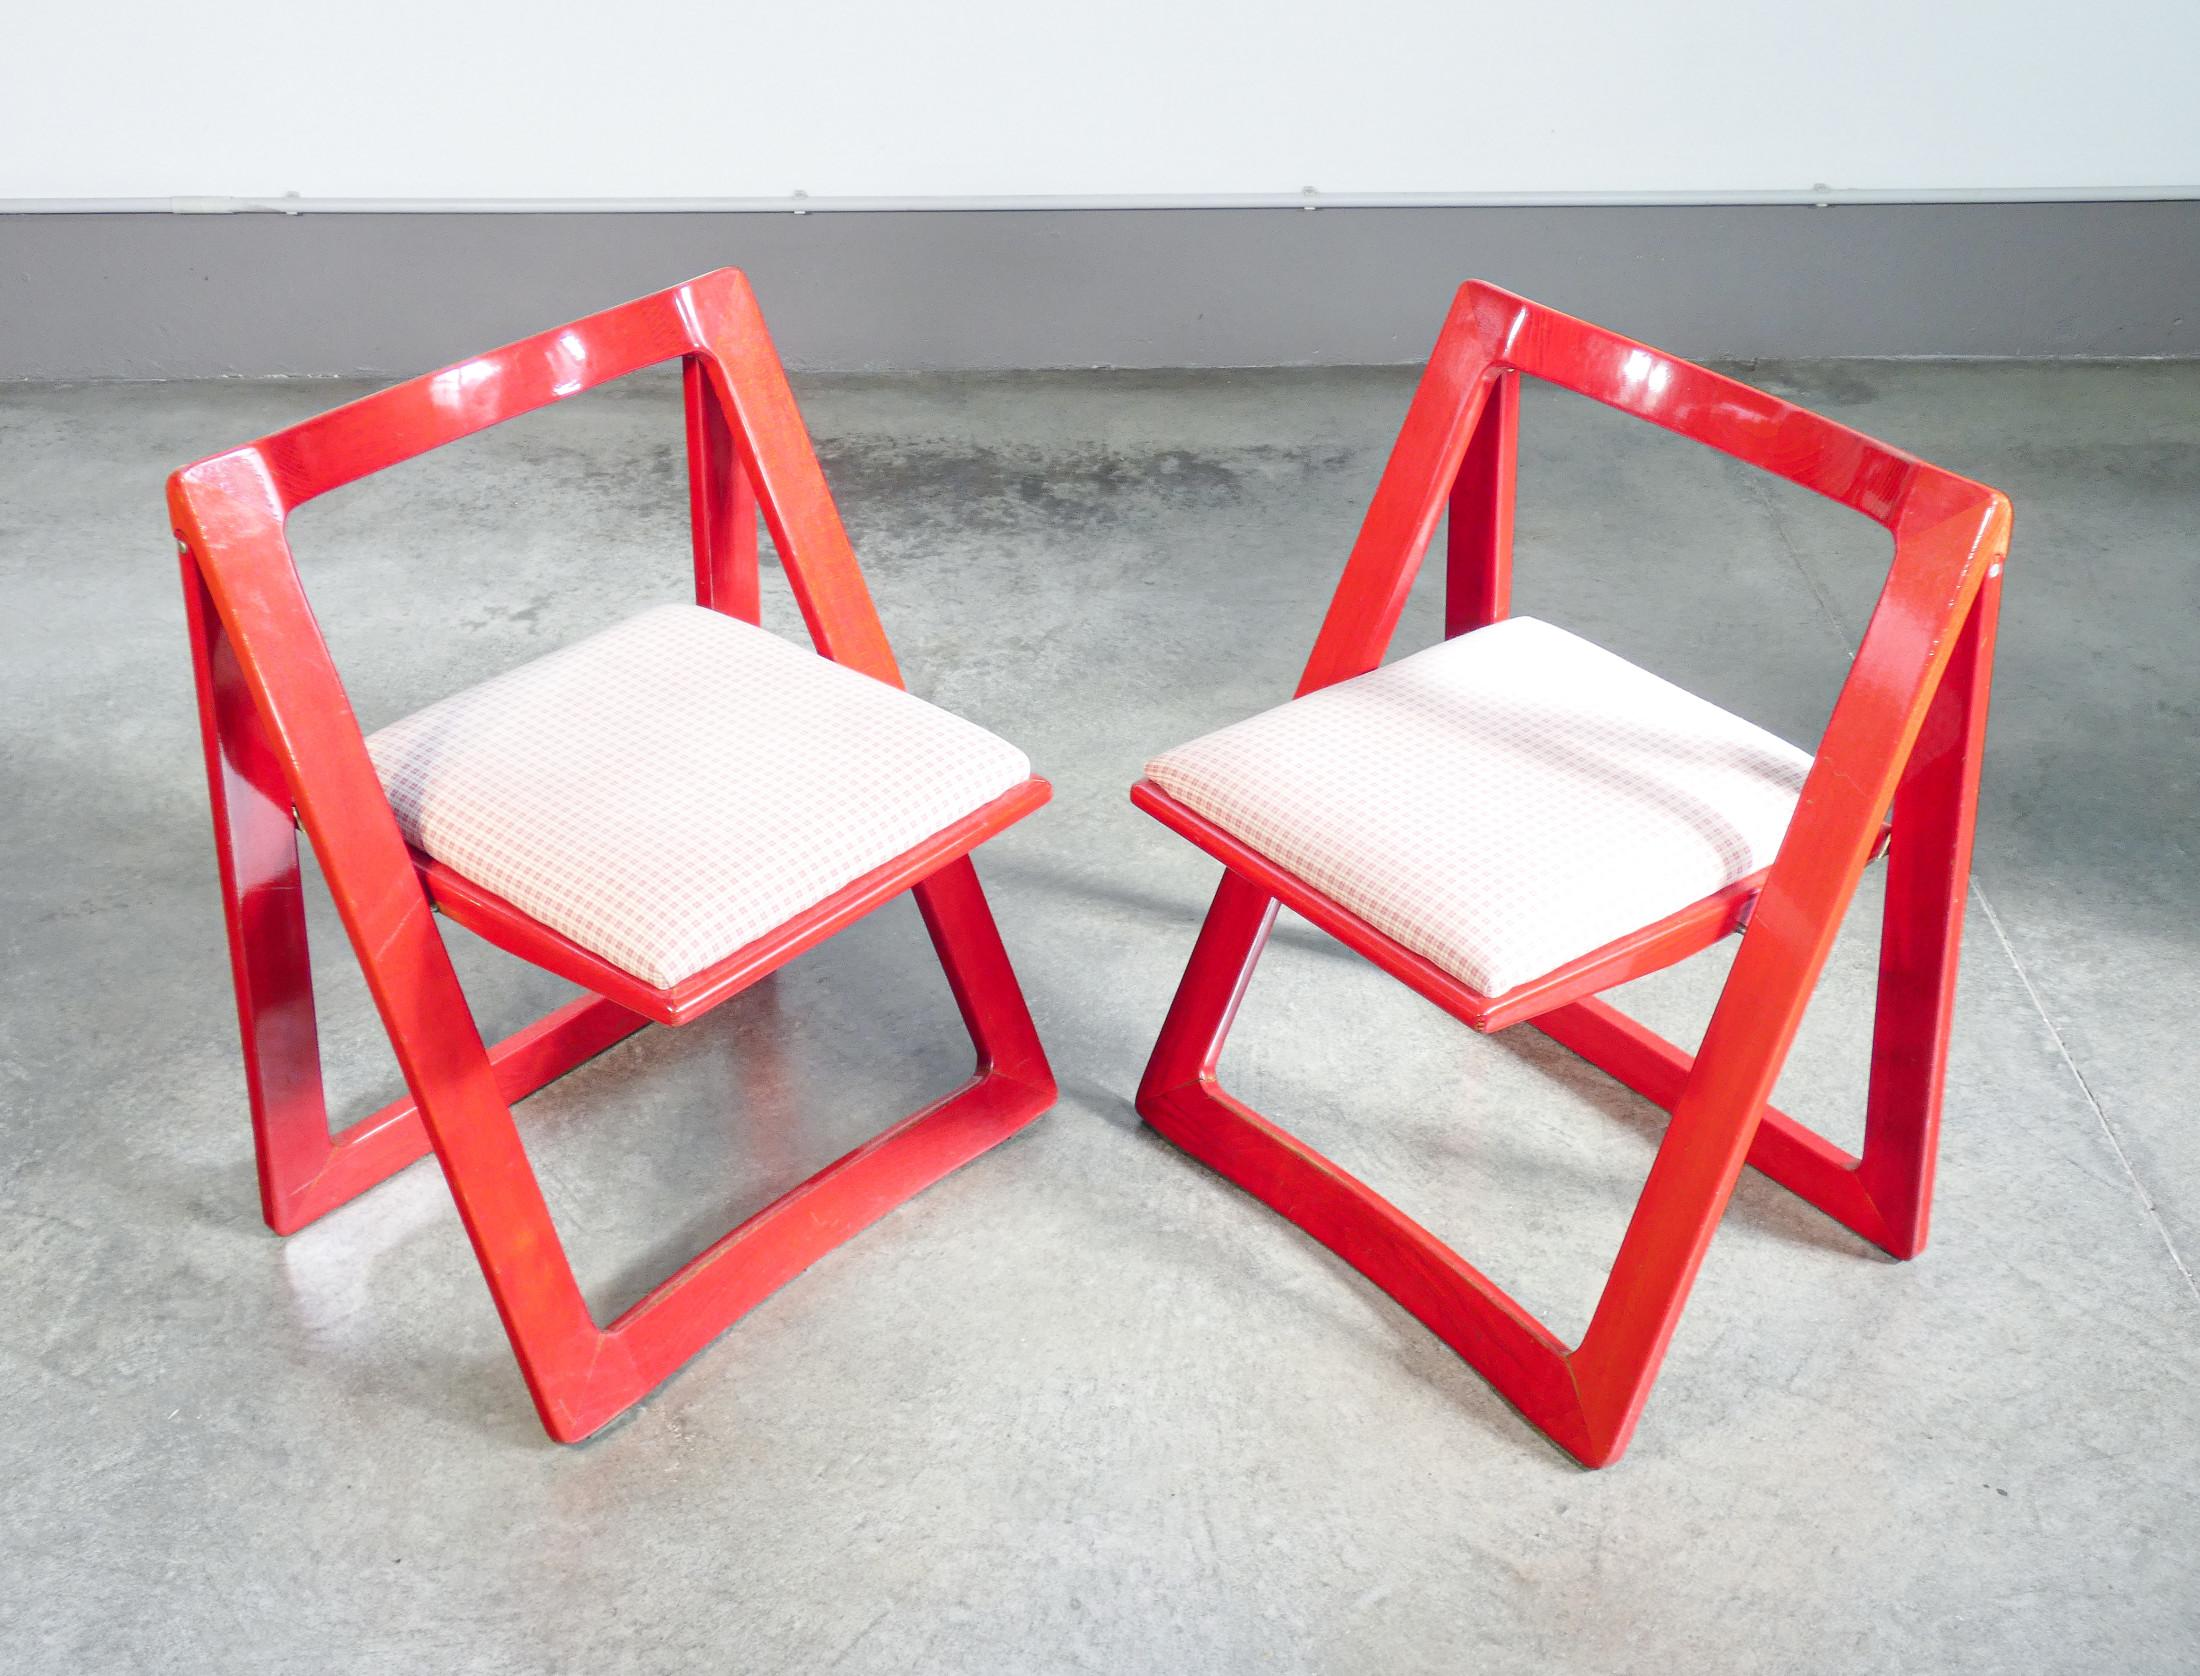 Set of four TRIESTE chairs, designed by D'ANIELLO & JACOBER for BAZZANI, red. '66 For Sale 1